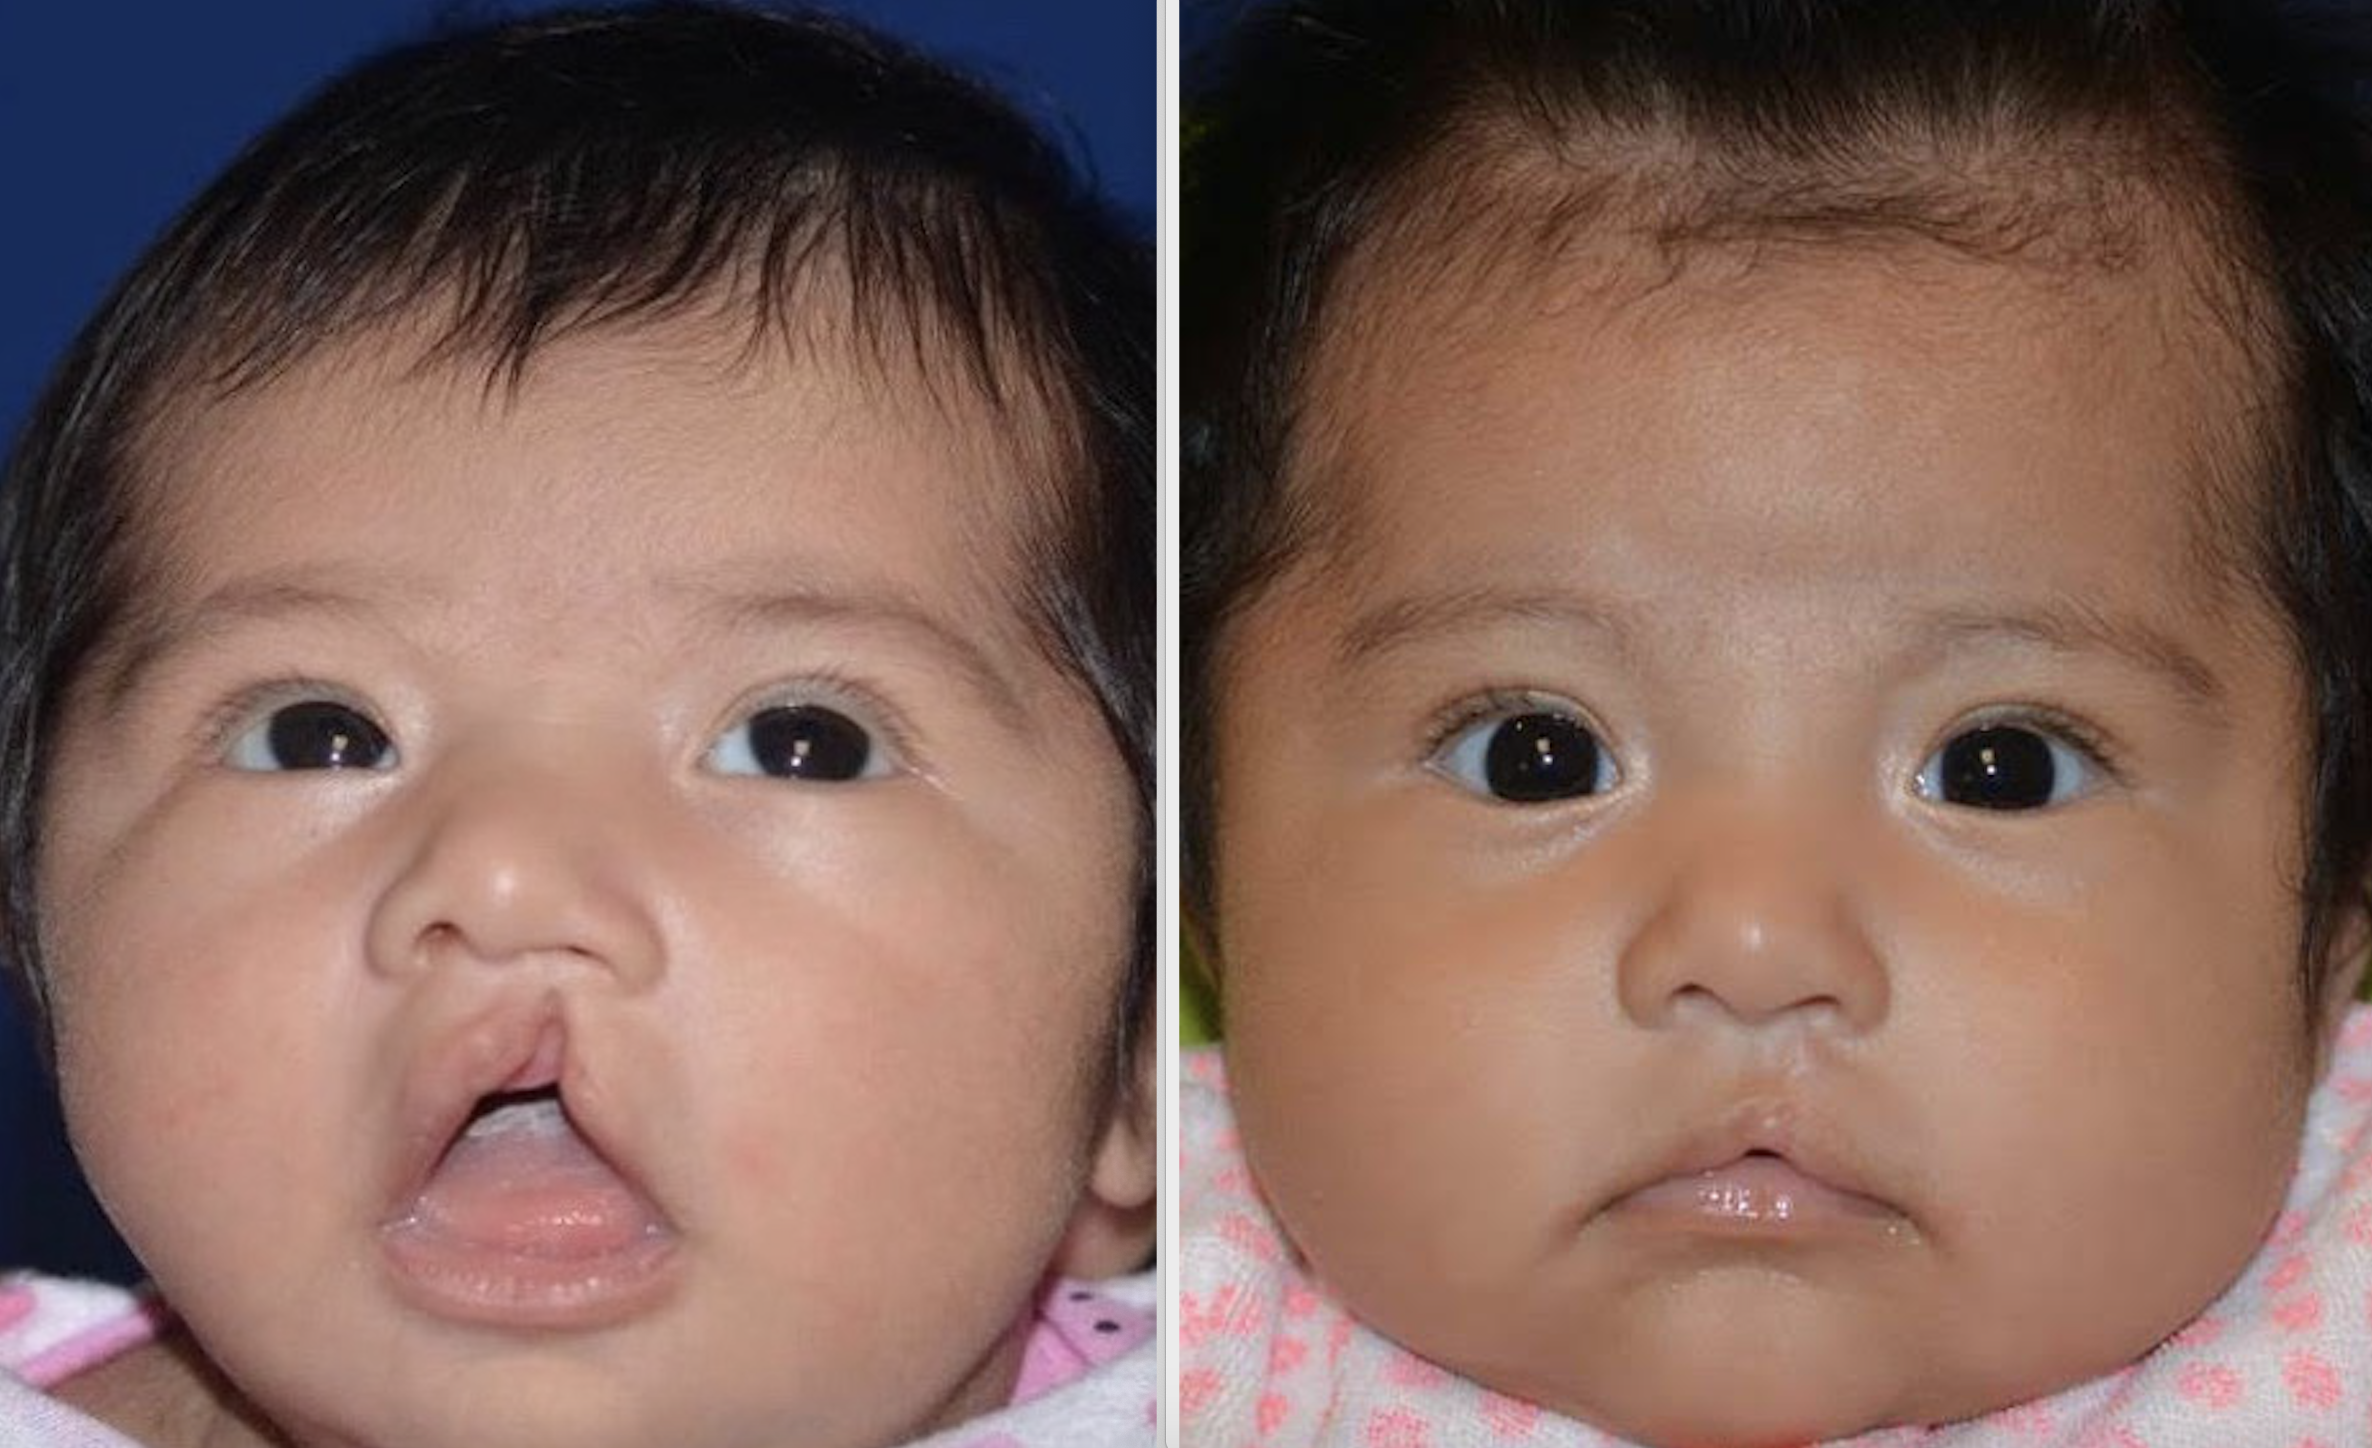 A patient of Dr. Hammoudeh who underwent ECLR at 2 weeks of age, pictured on the right 5 months after surgery.